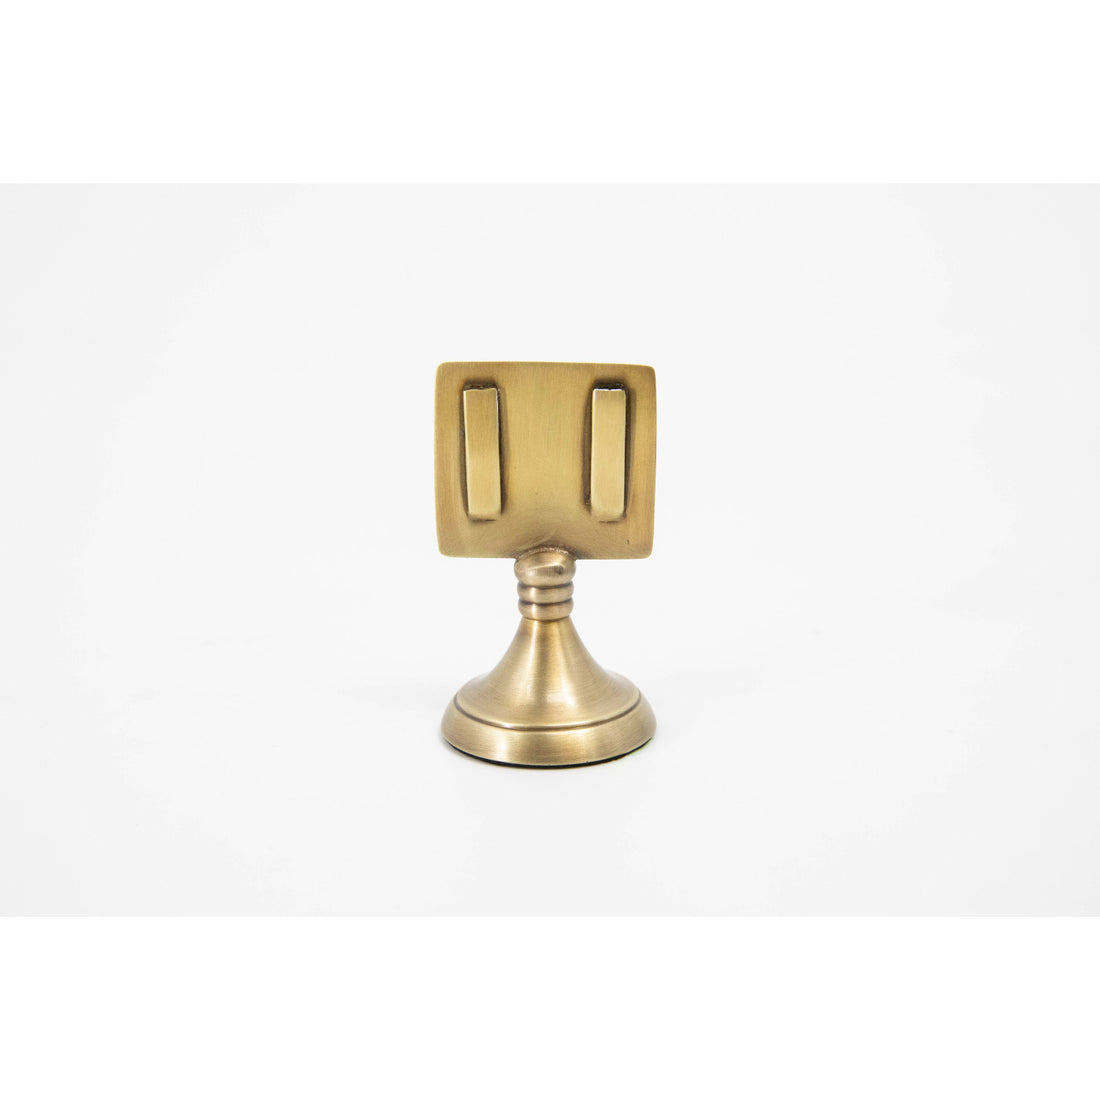 An elegant, brass, short round stand topped by a flat card-holder with two flat prongs.